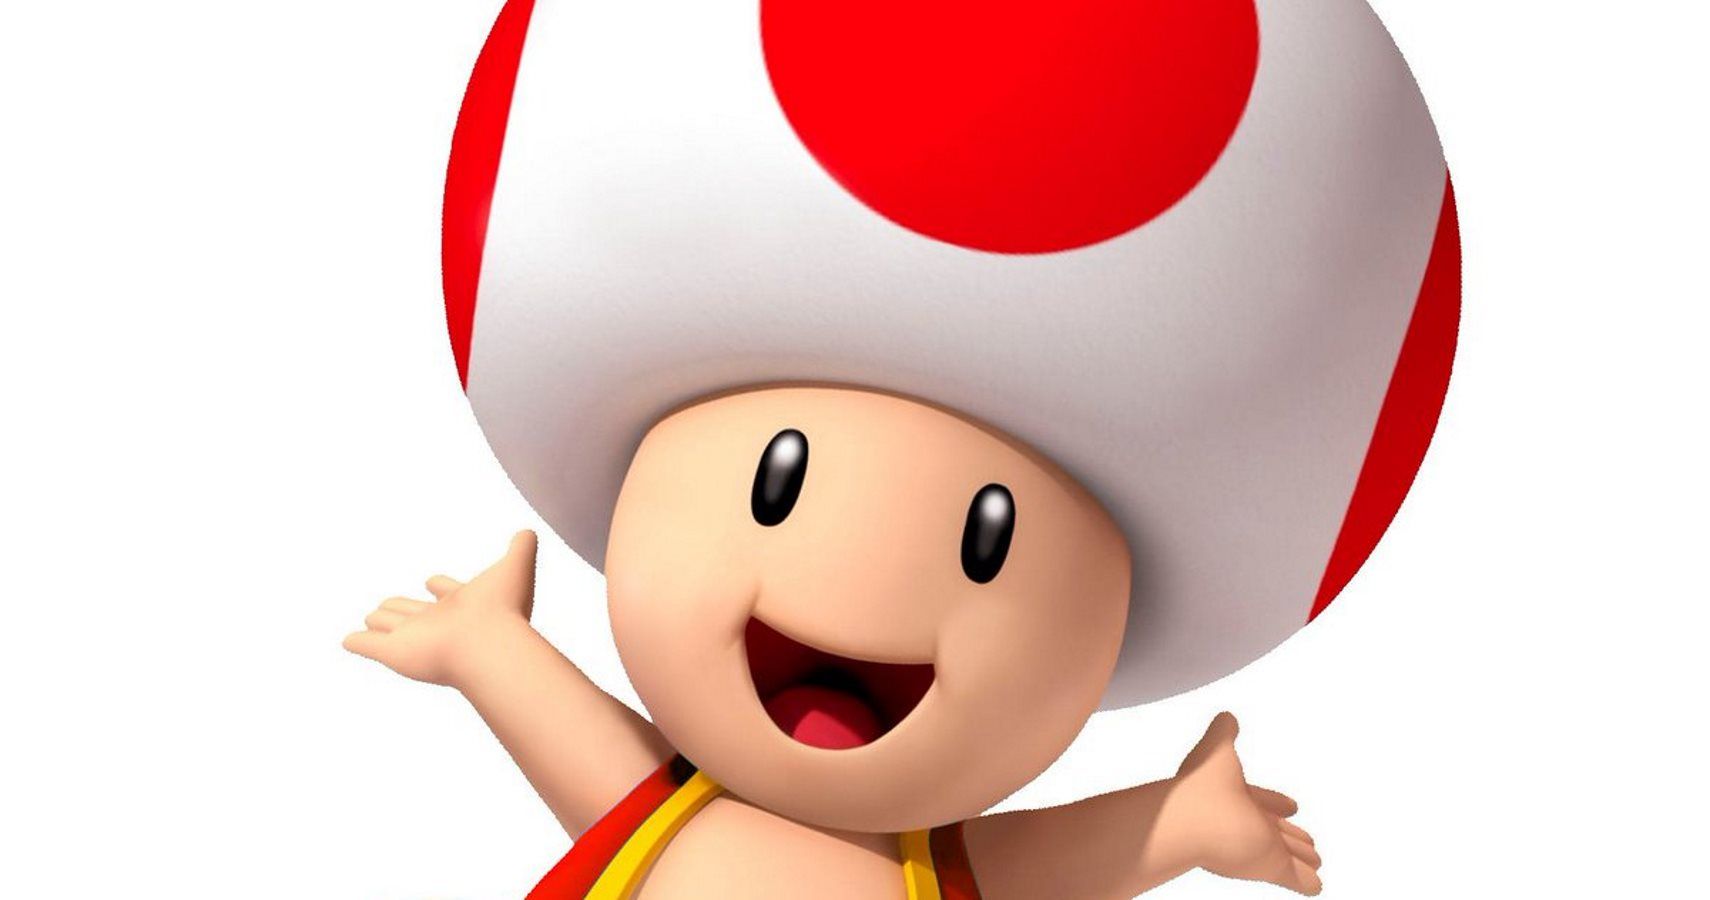 Nintendo Confirms Toad Isn't Wearing A Hat - It's Just His Weird Head